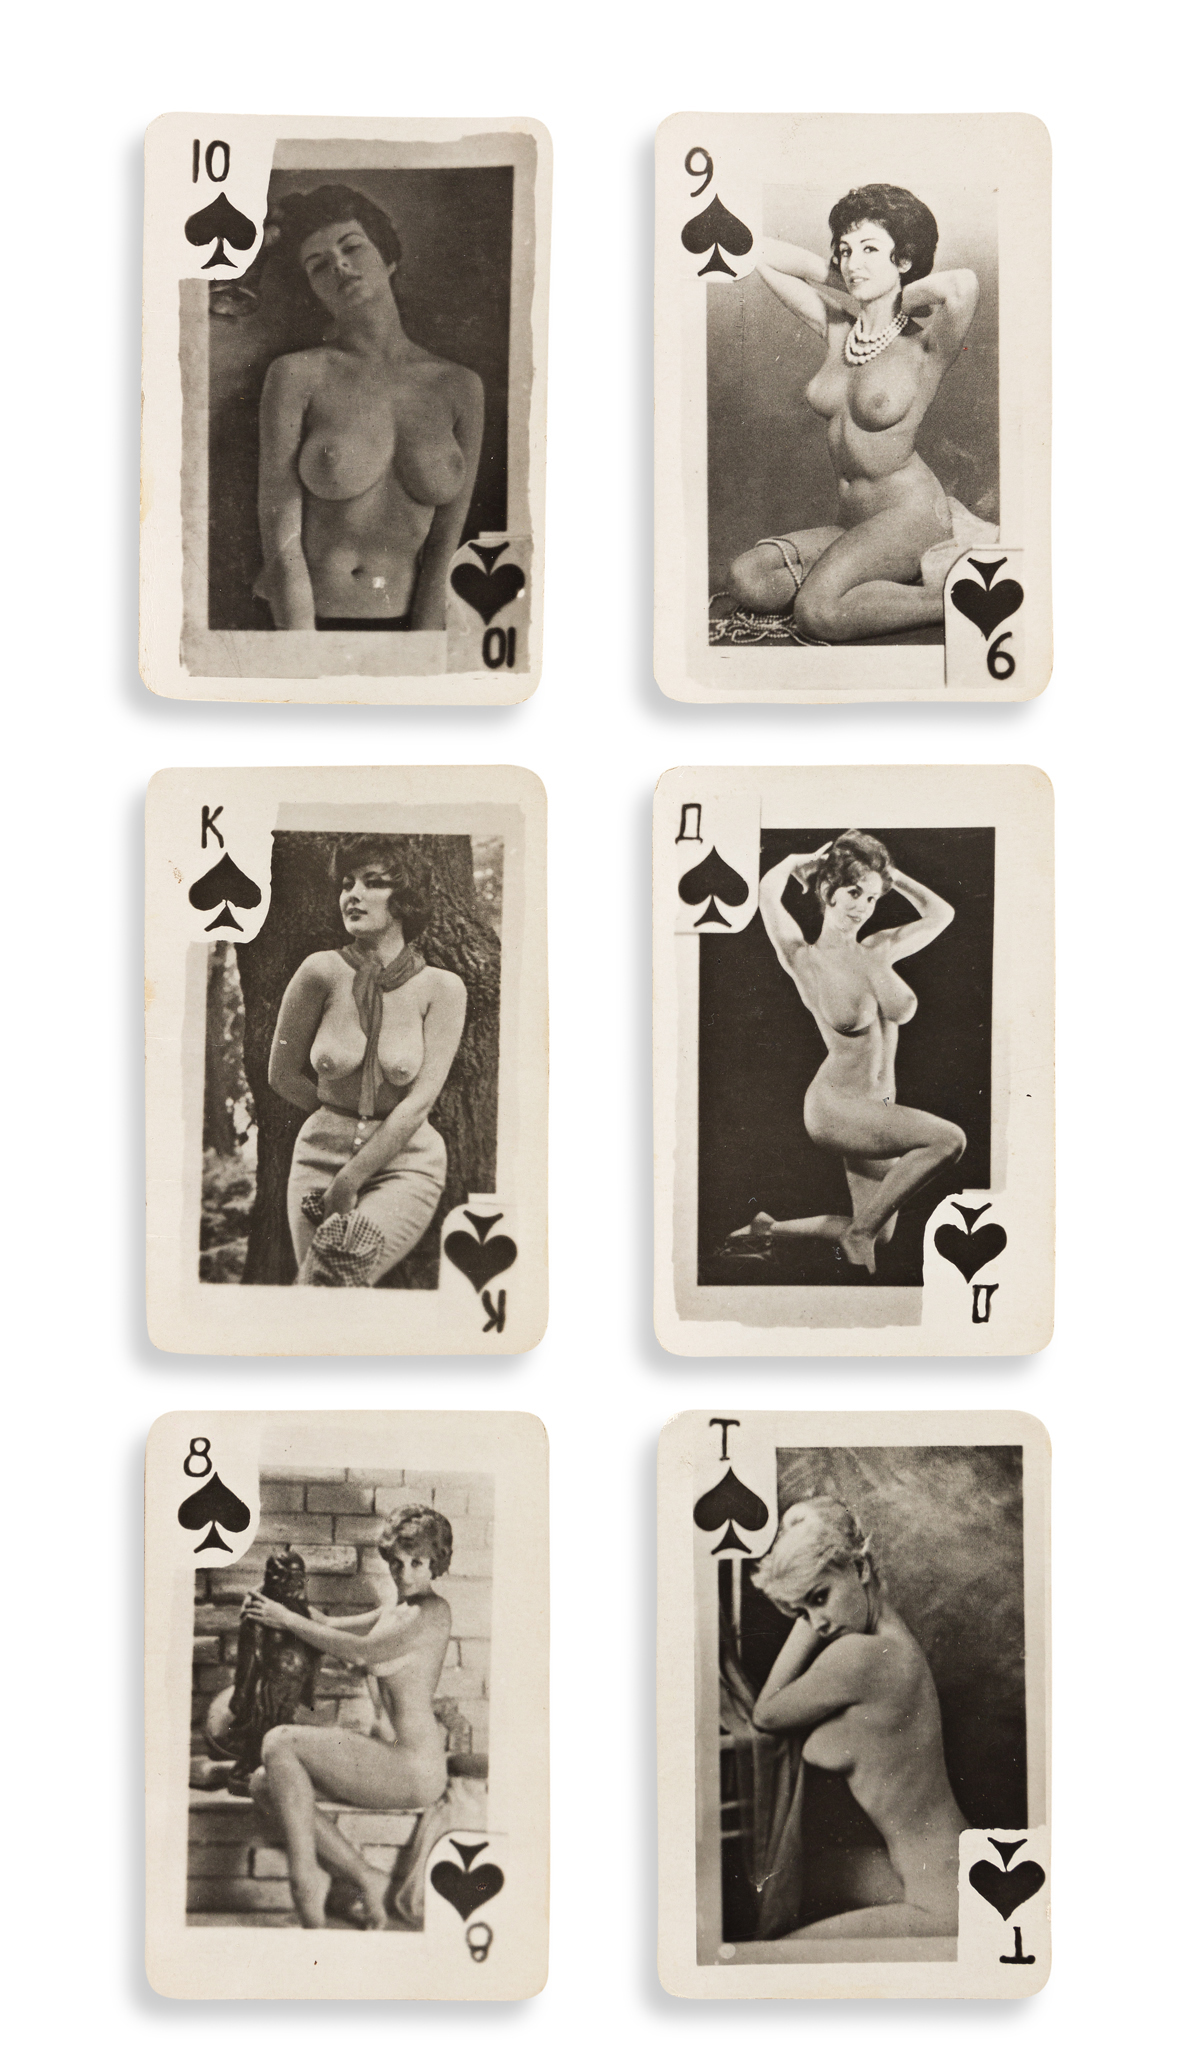 bong go add photo naked women playing cards